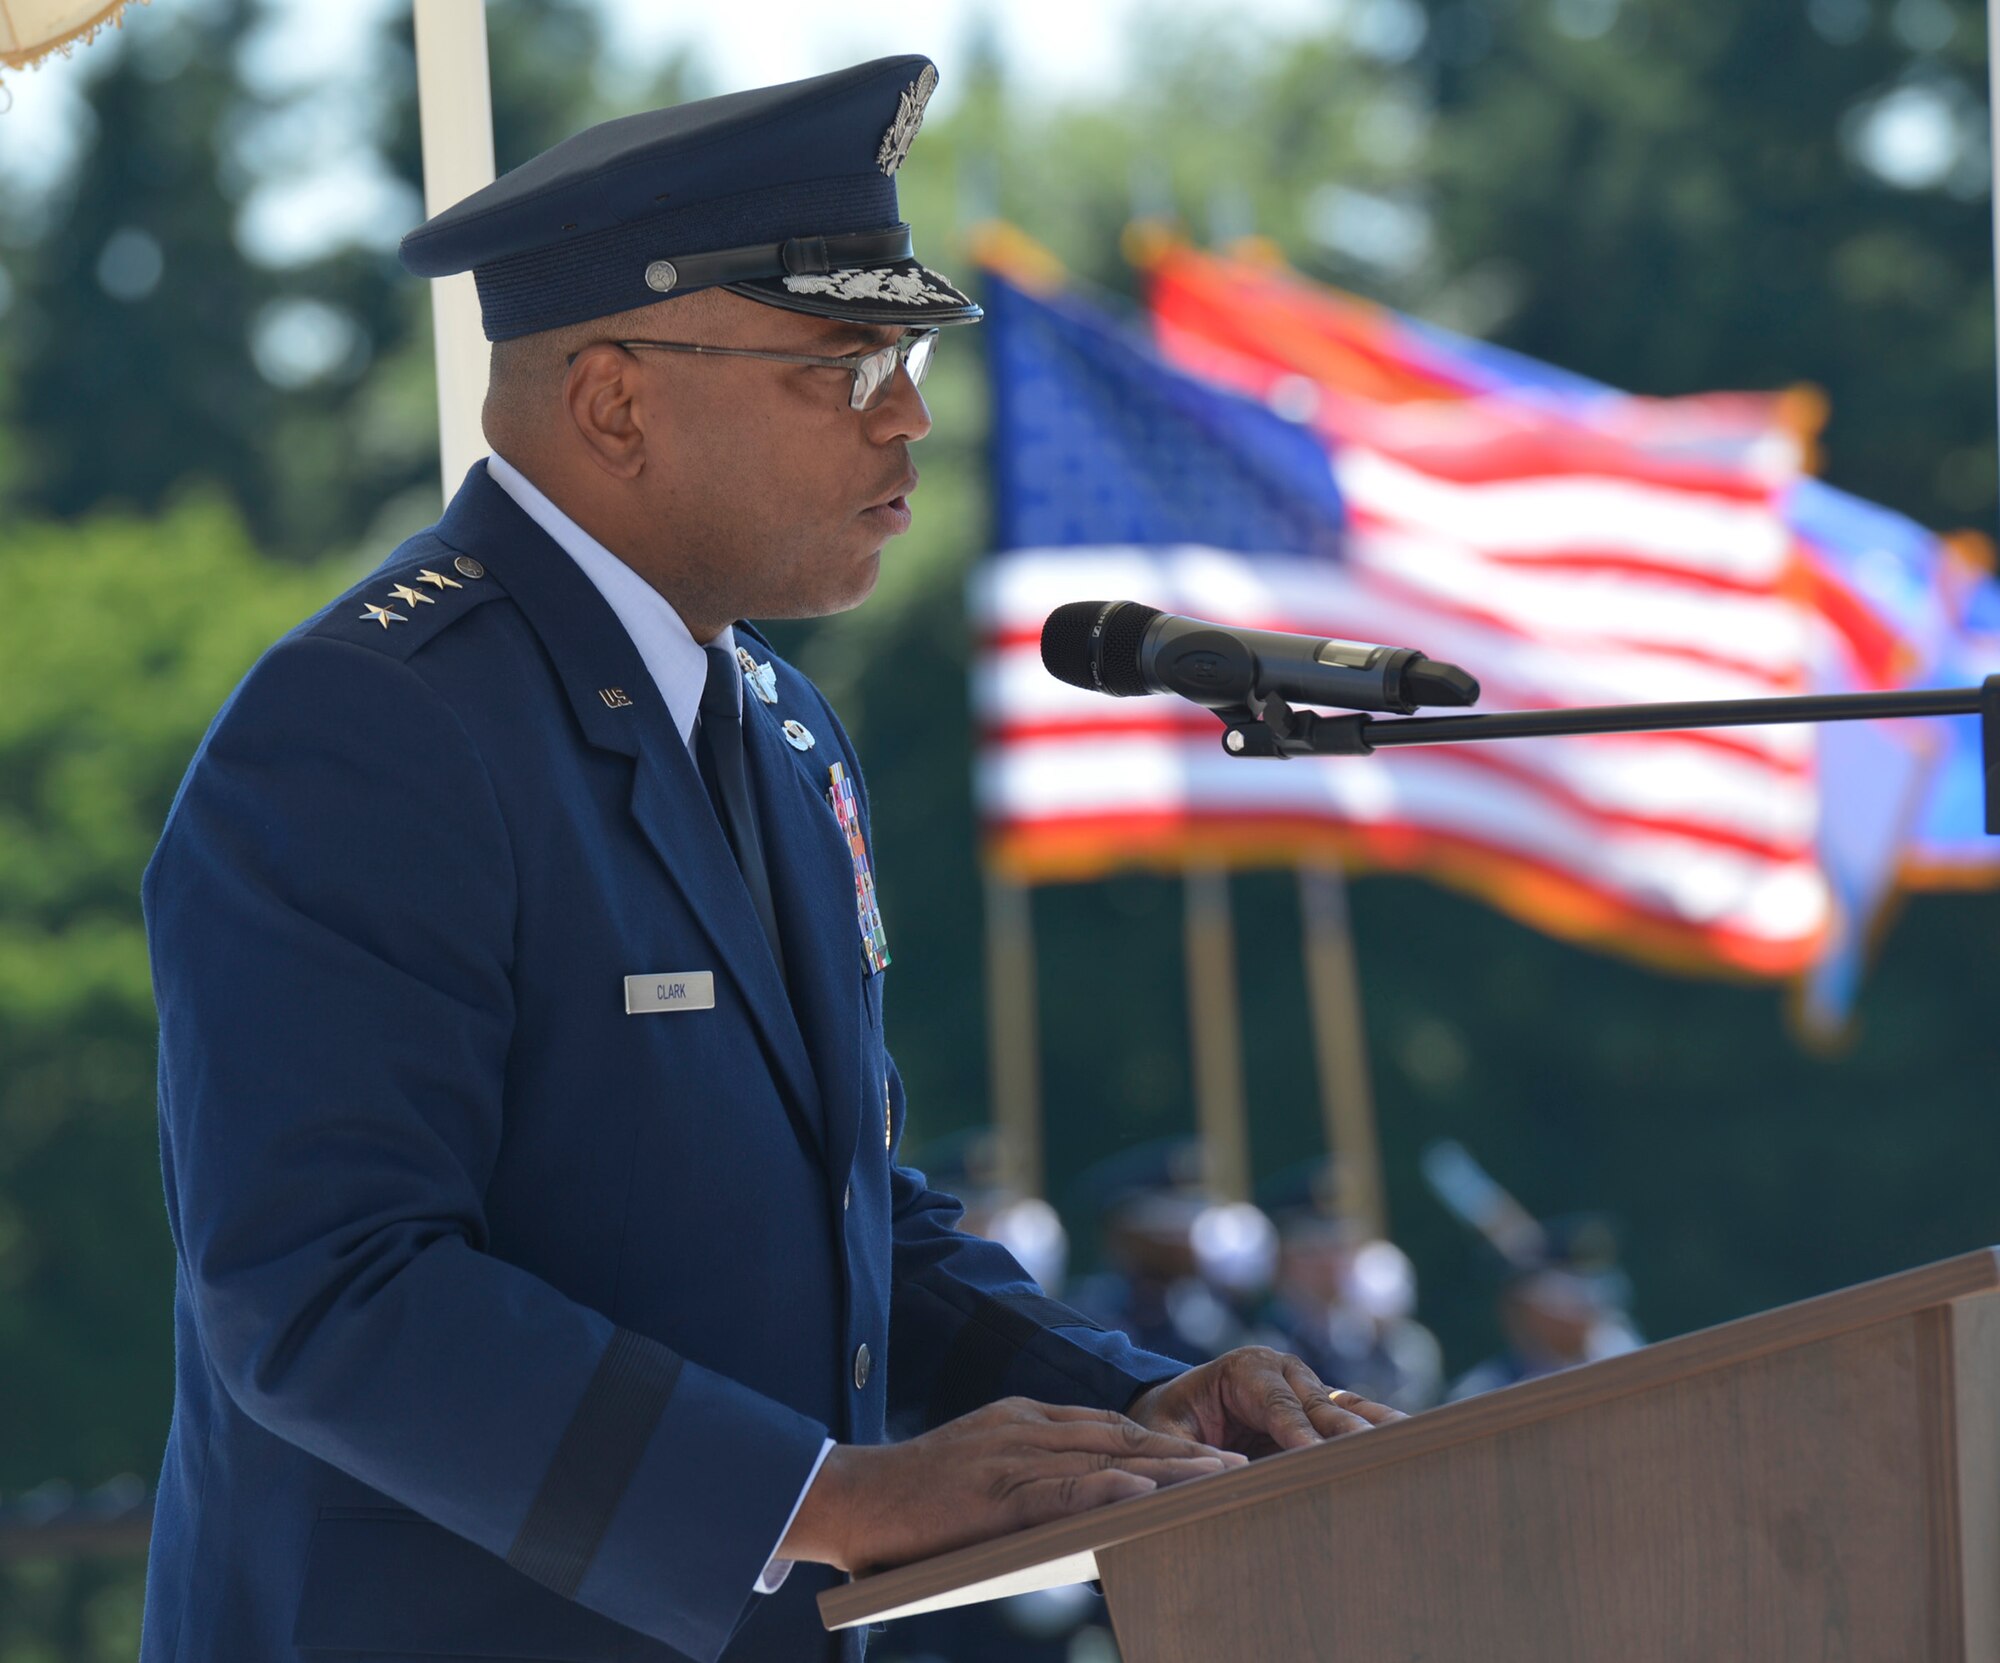 Lt. Gen. Richard Clark, 3rd Air Force commander, addresses the crowd during the Memorial Day Ceremony at the Luxembourg American Military Cemetery in Hamm, Luxembourg, May 27, 2017. The ceremony brought together military representatives and hundreds of supporters to recognize the sacrifices made by American service members in support of freedom abroad.